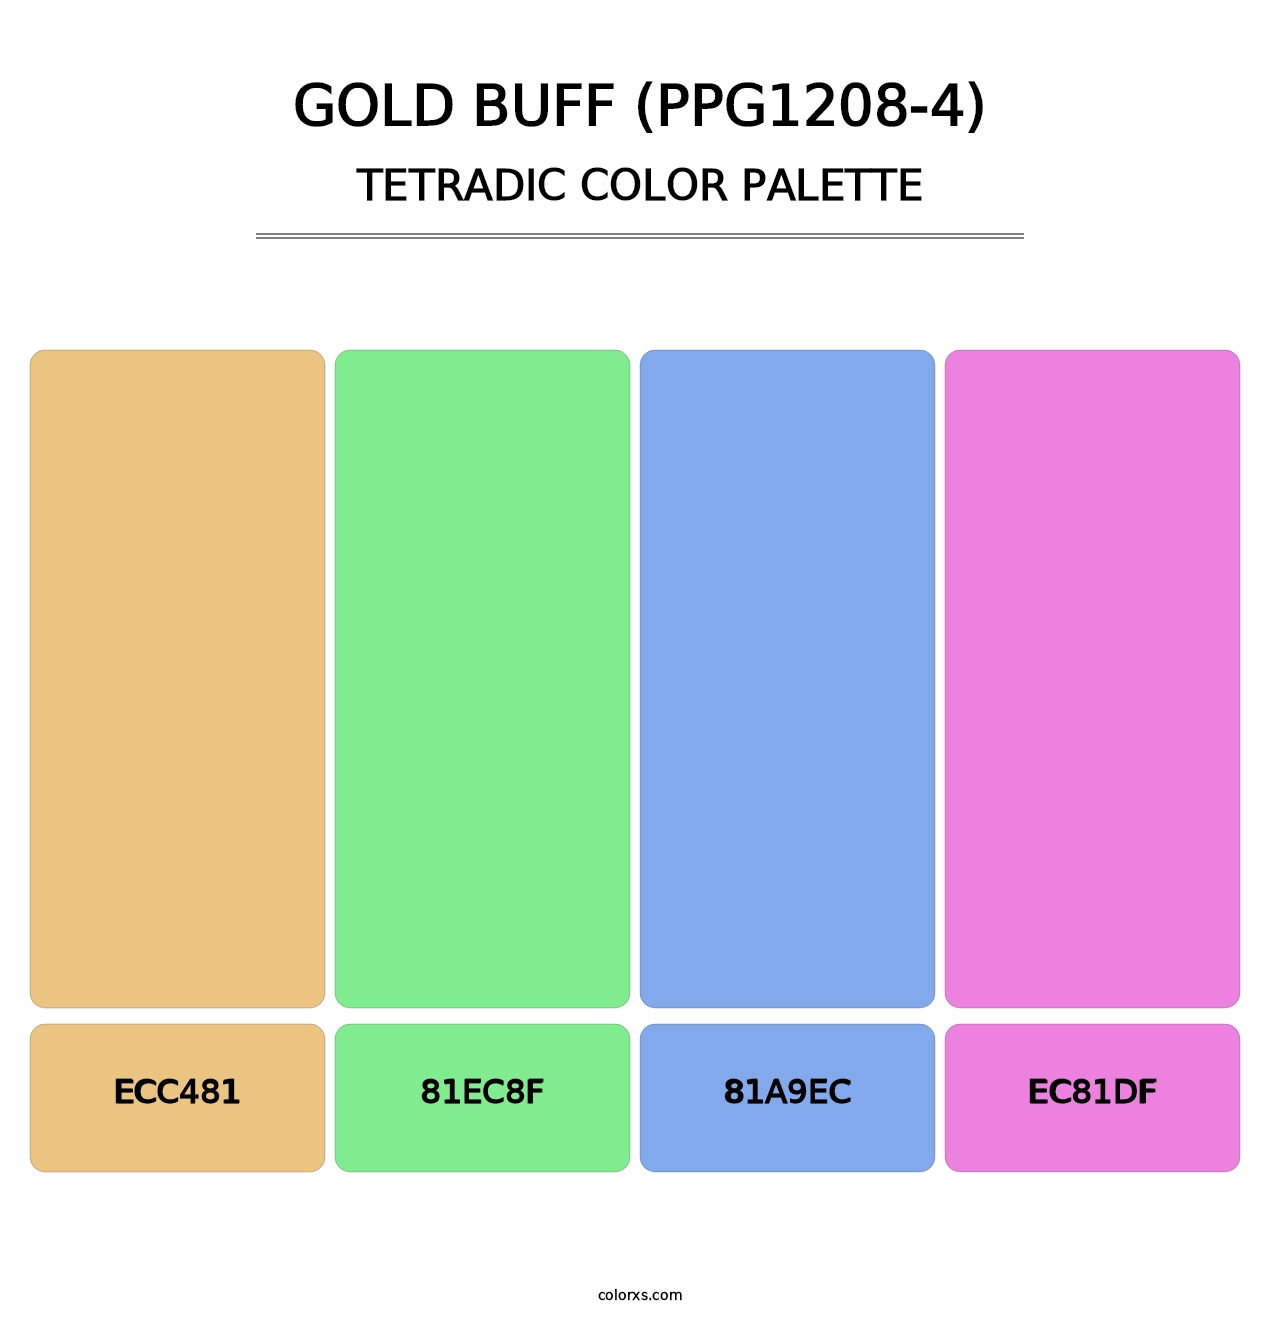 Gold Buff (PPG1208-4) - Tetradic Color Palette